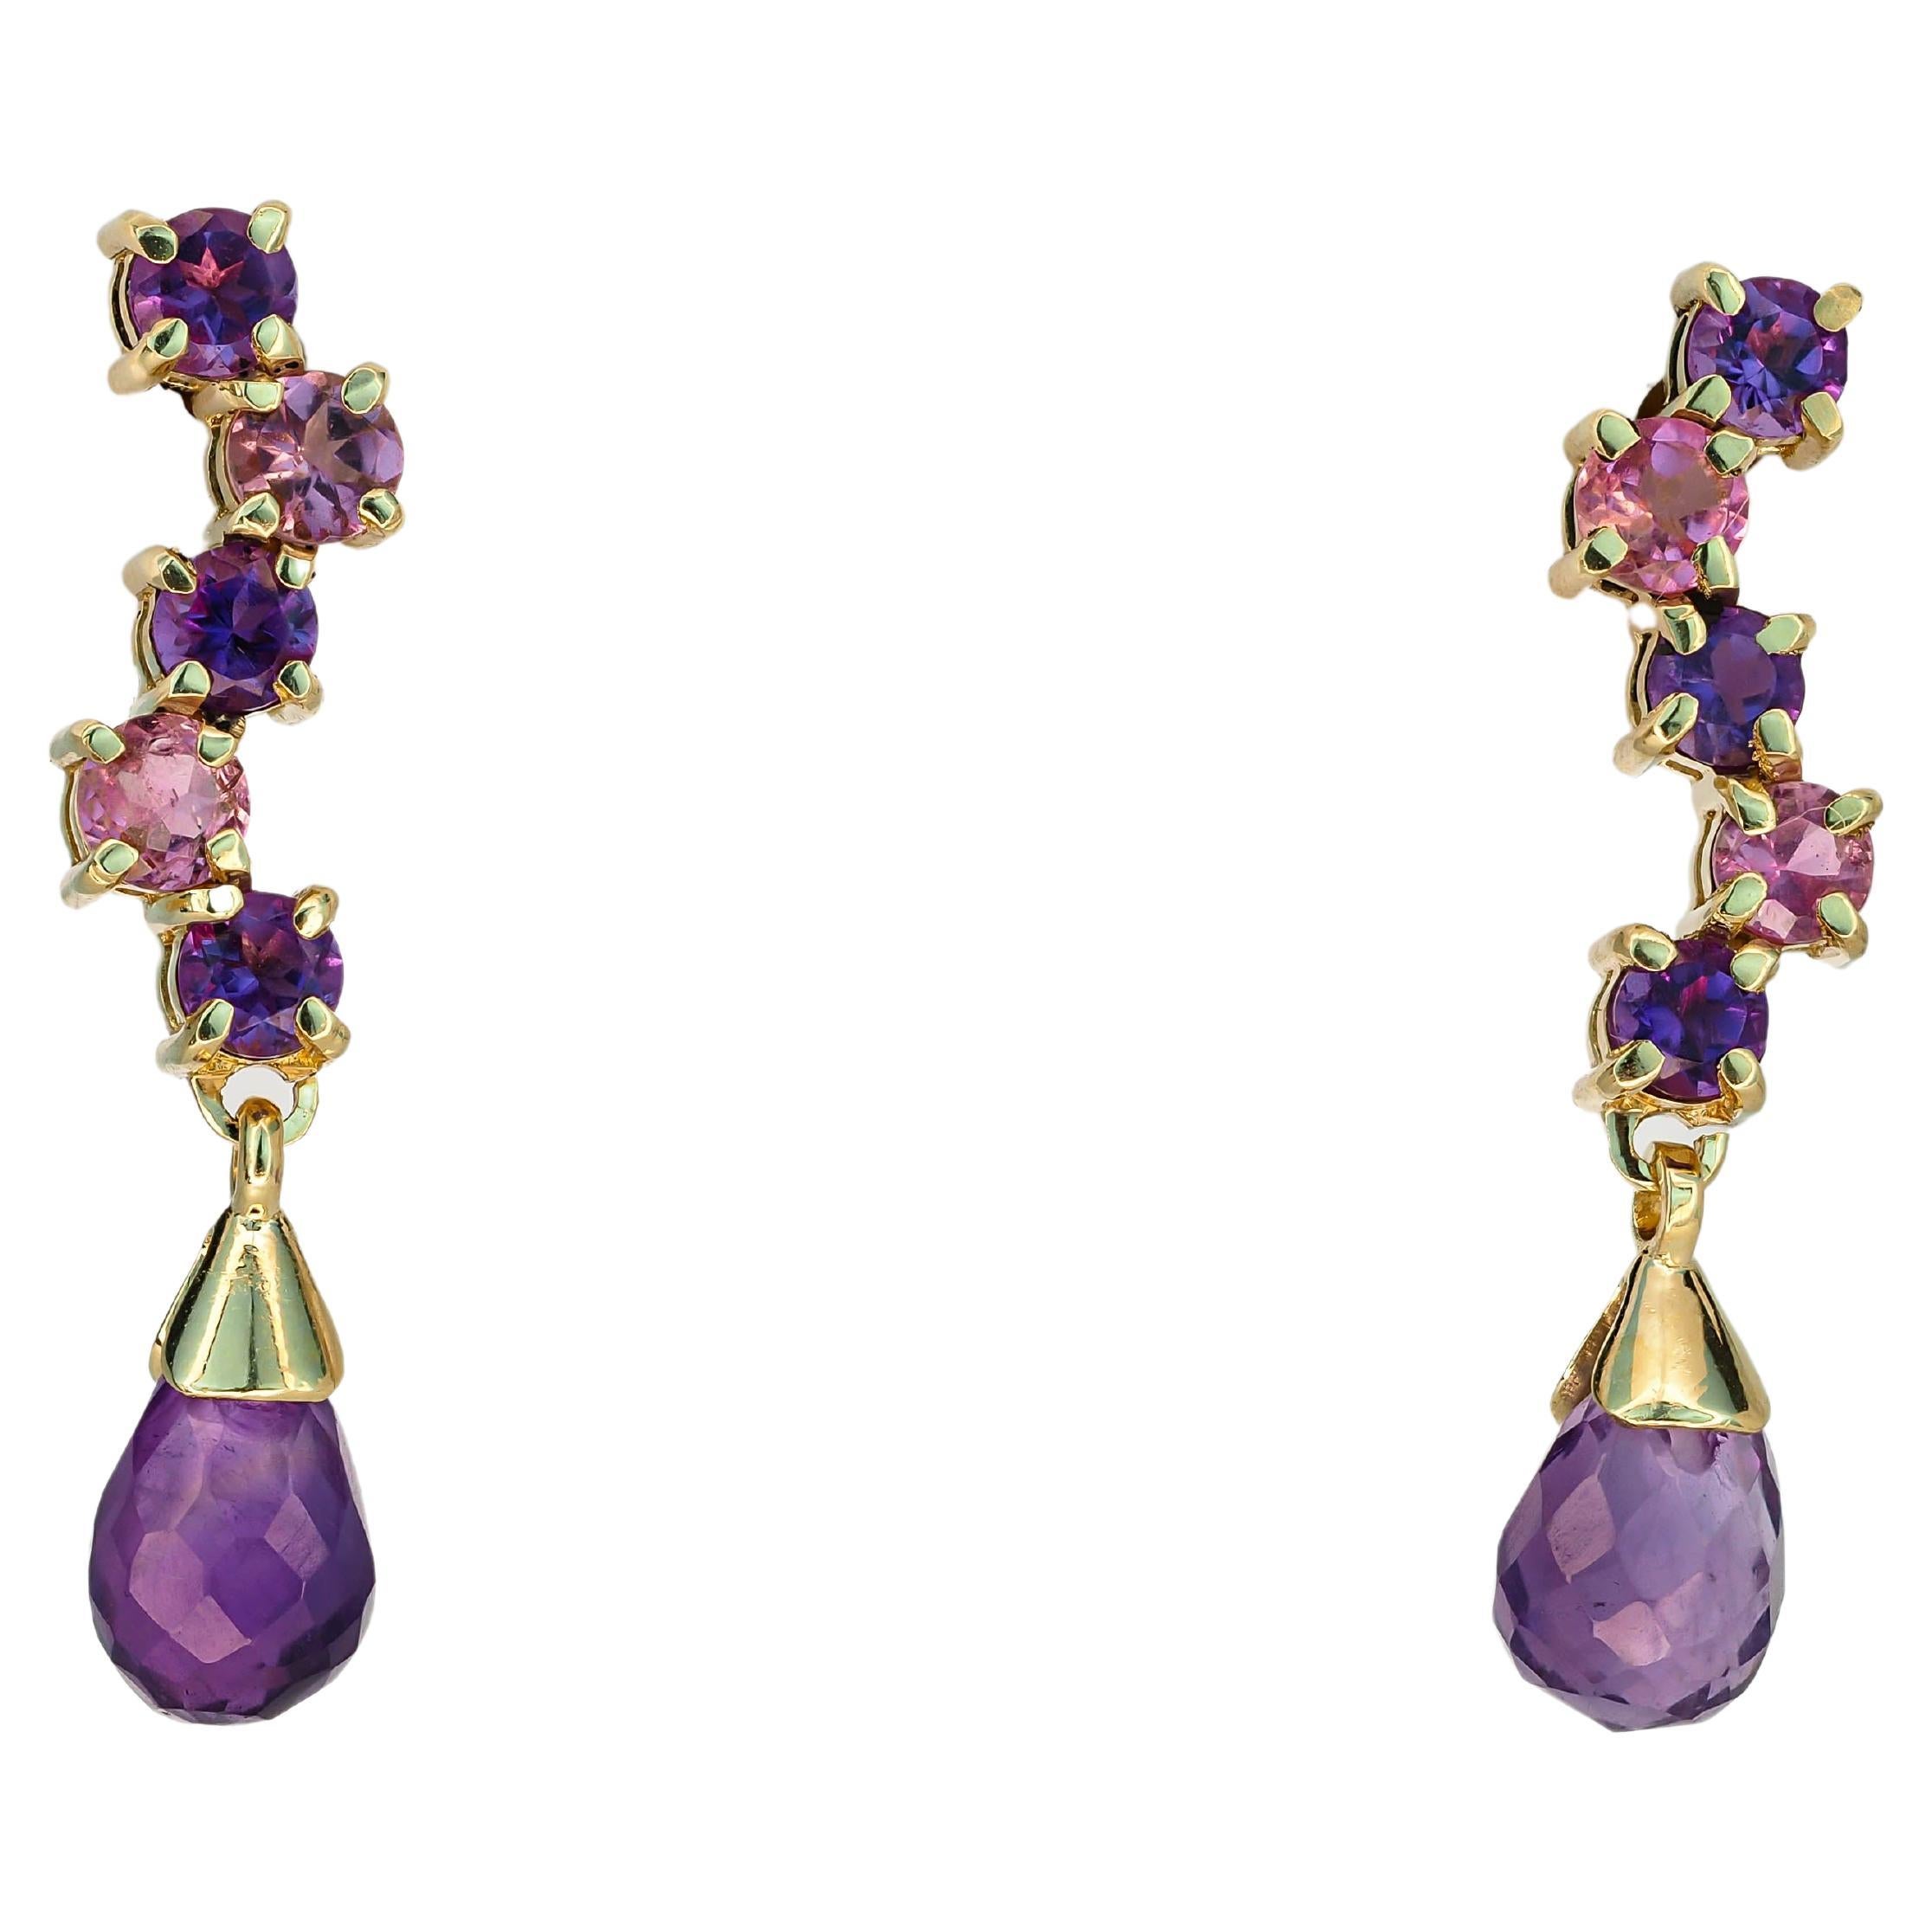 14k Gold Drop Earrings Studs with Amethysts and Sapphires